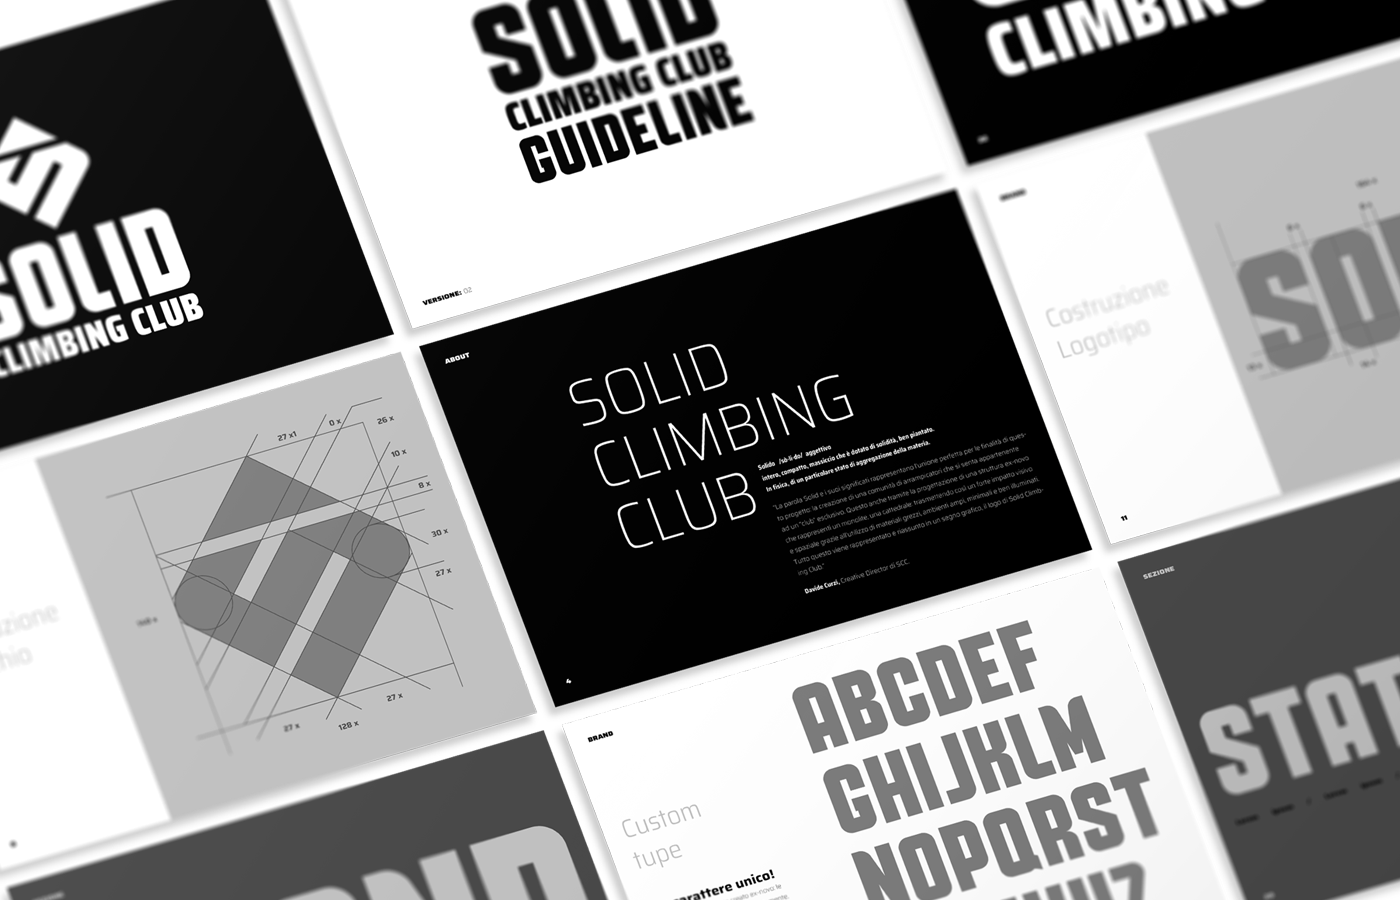 Solid Climbing Club guideline